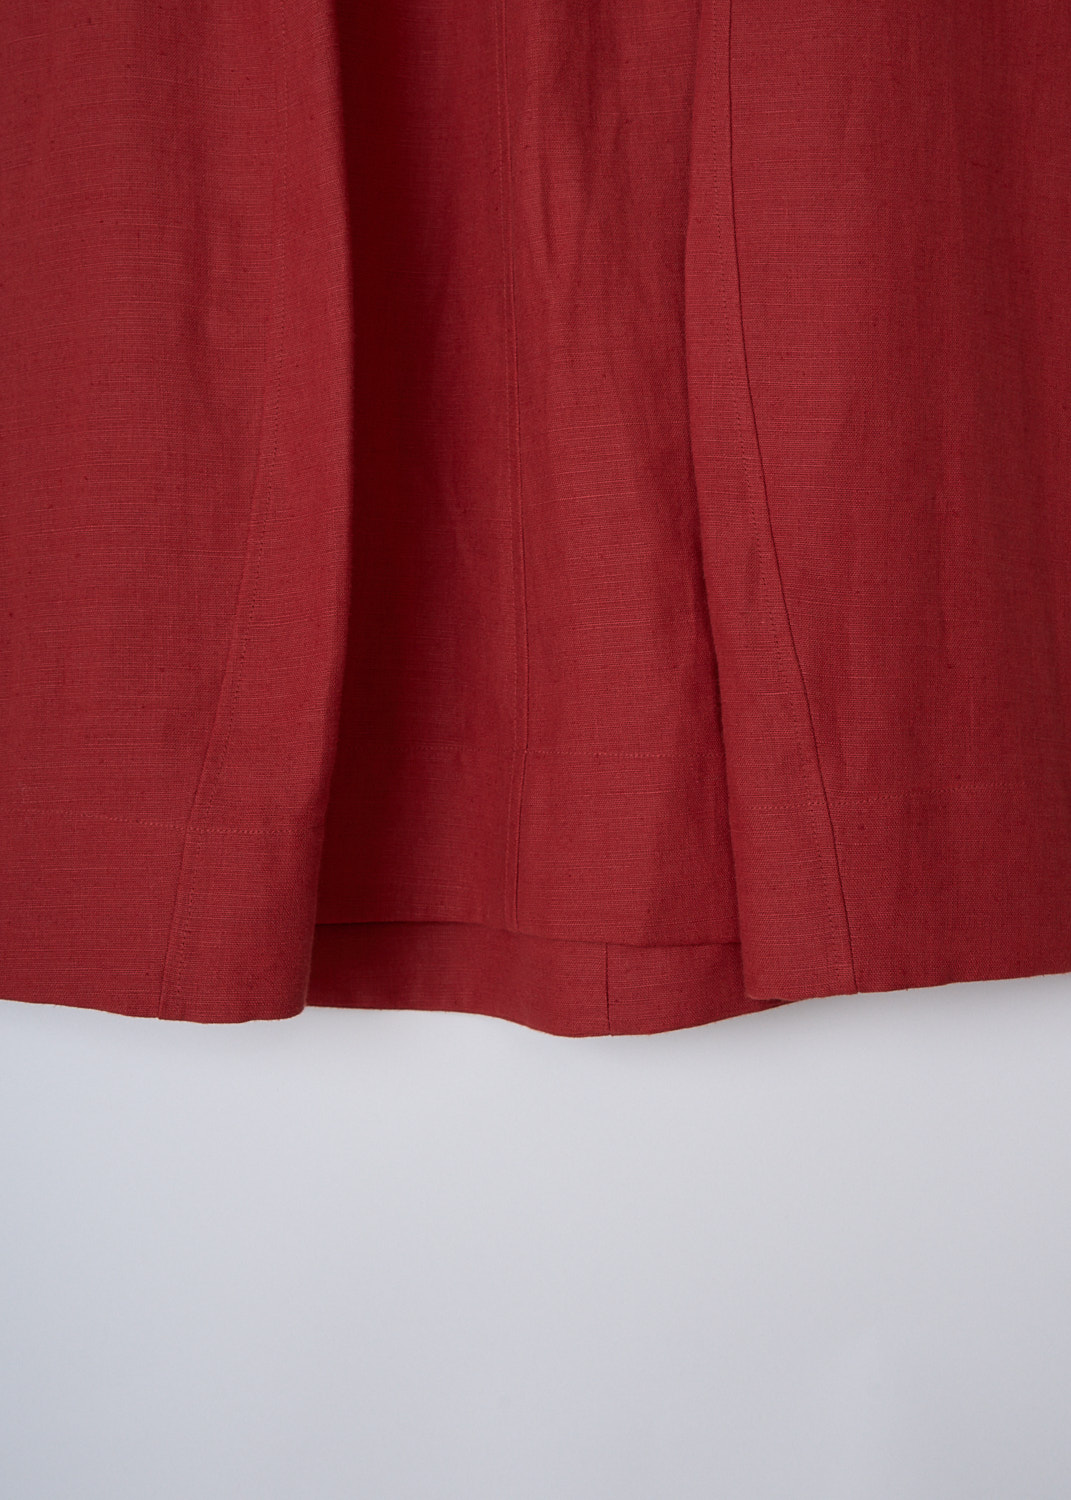 CHLOÉ, LINEN A-LINE SKIRT IN PEPPERY RED, CHC23UJU08030649_PEPPERY_RED, Red, Detail, This Peppery Red linen midi skirt has a wide A-line silhouette. The skirt has a narrow waistband. Concealed slanted pockets can be found in the side seam. In the back, a concealed centre zip functions as the closure. The skirt has a straight hemline. 
